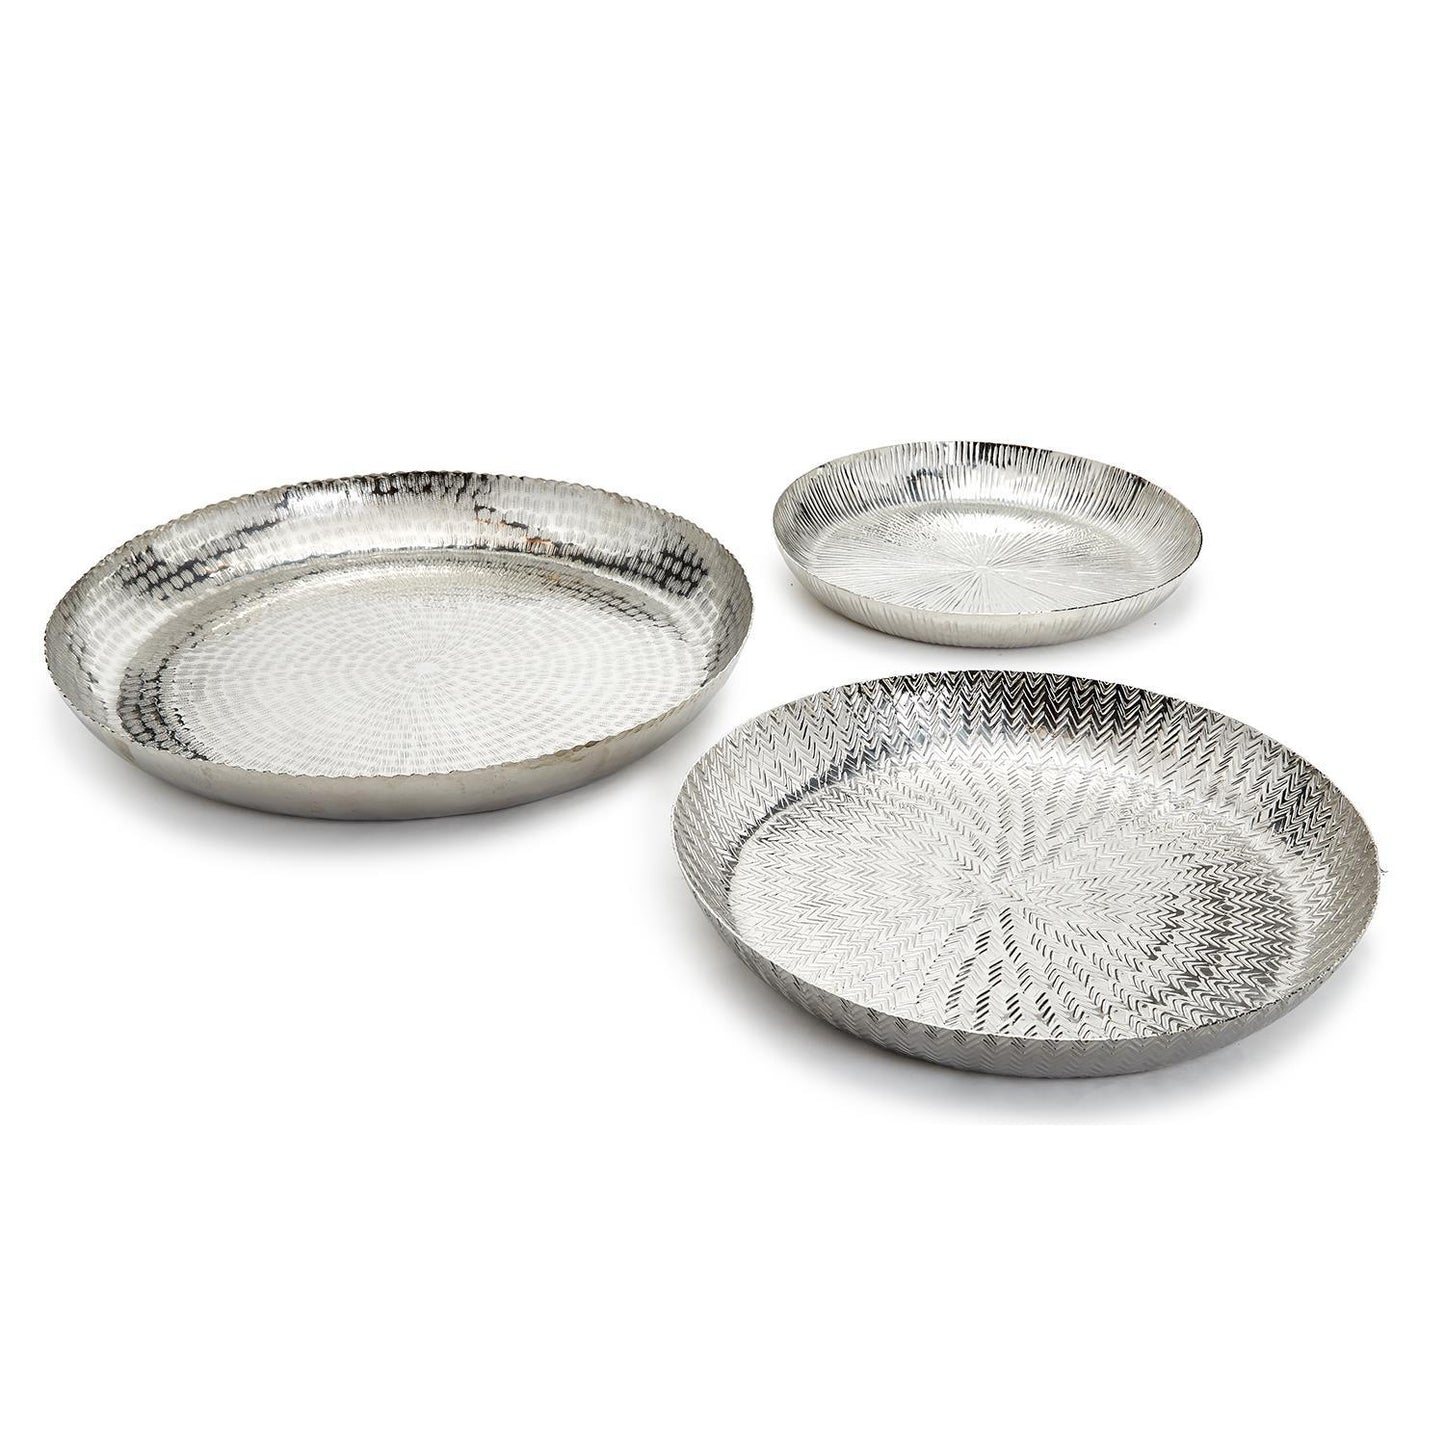 Two's Company Medina Set Of 3 Hand Hammered Tray In 3 Designs-Aluminum